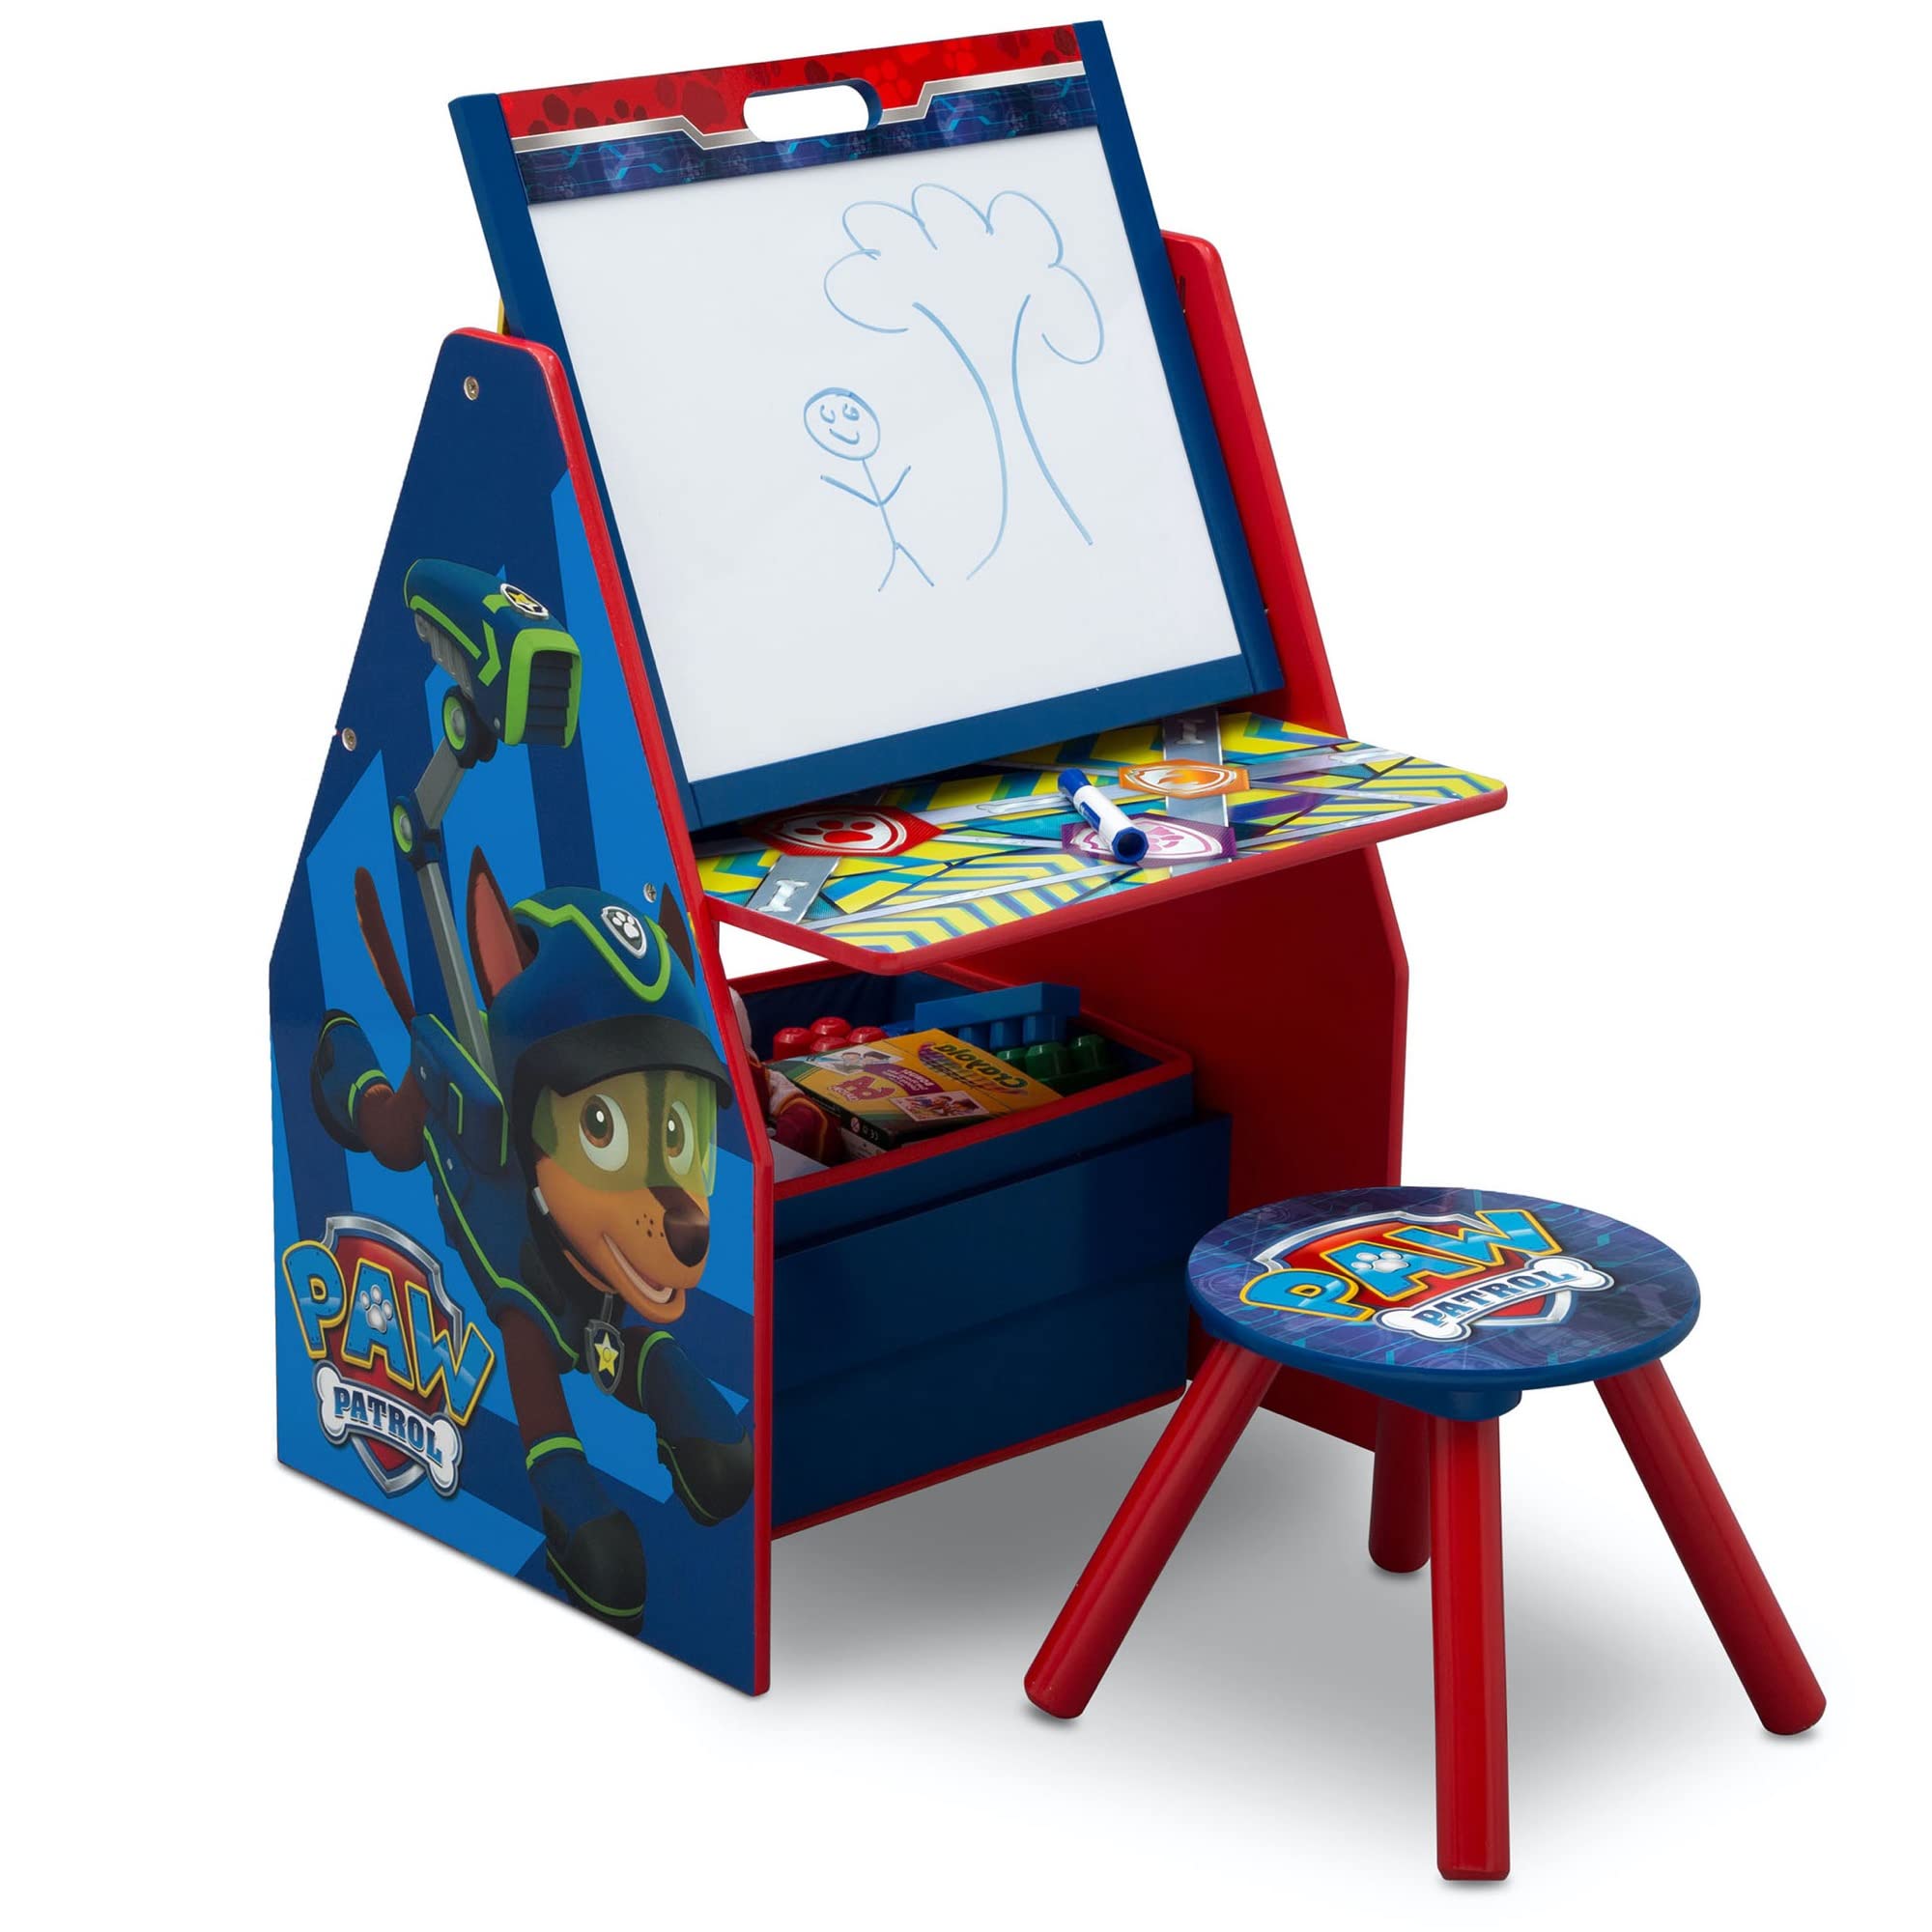 Kids Easel and Play Station Ideal for Arts Crafts Drawing Homeschooling and More Nick Jr. PAW Patrol 送料無料